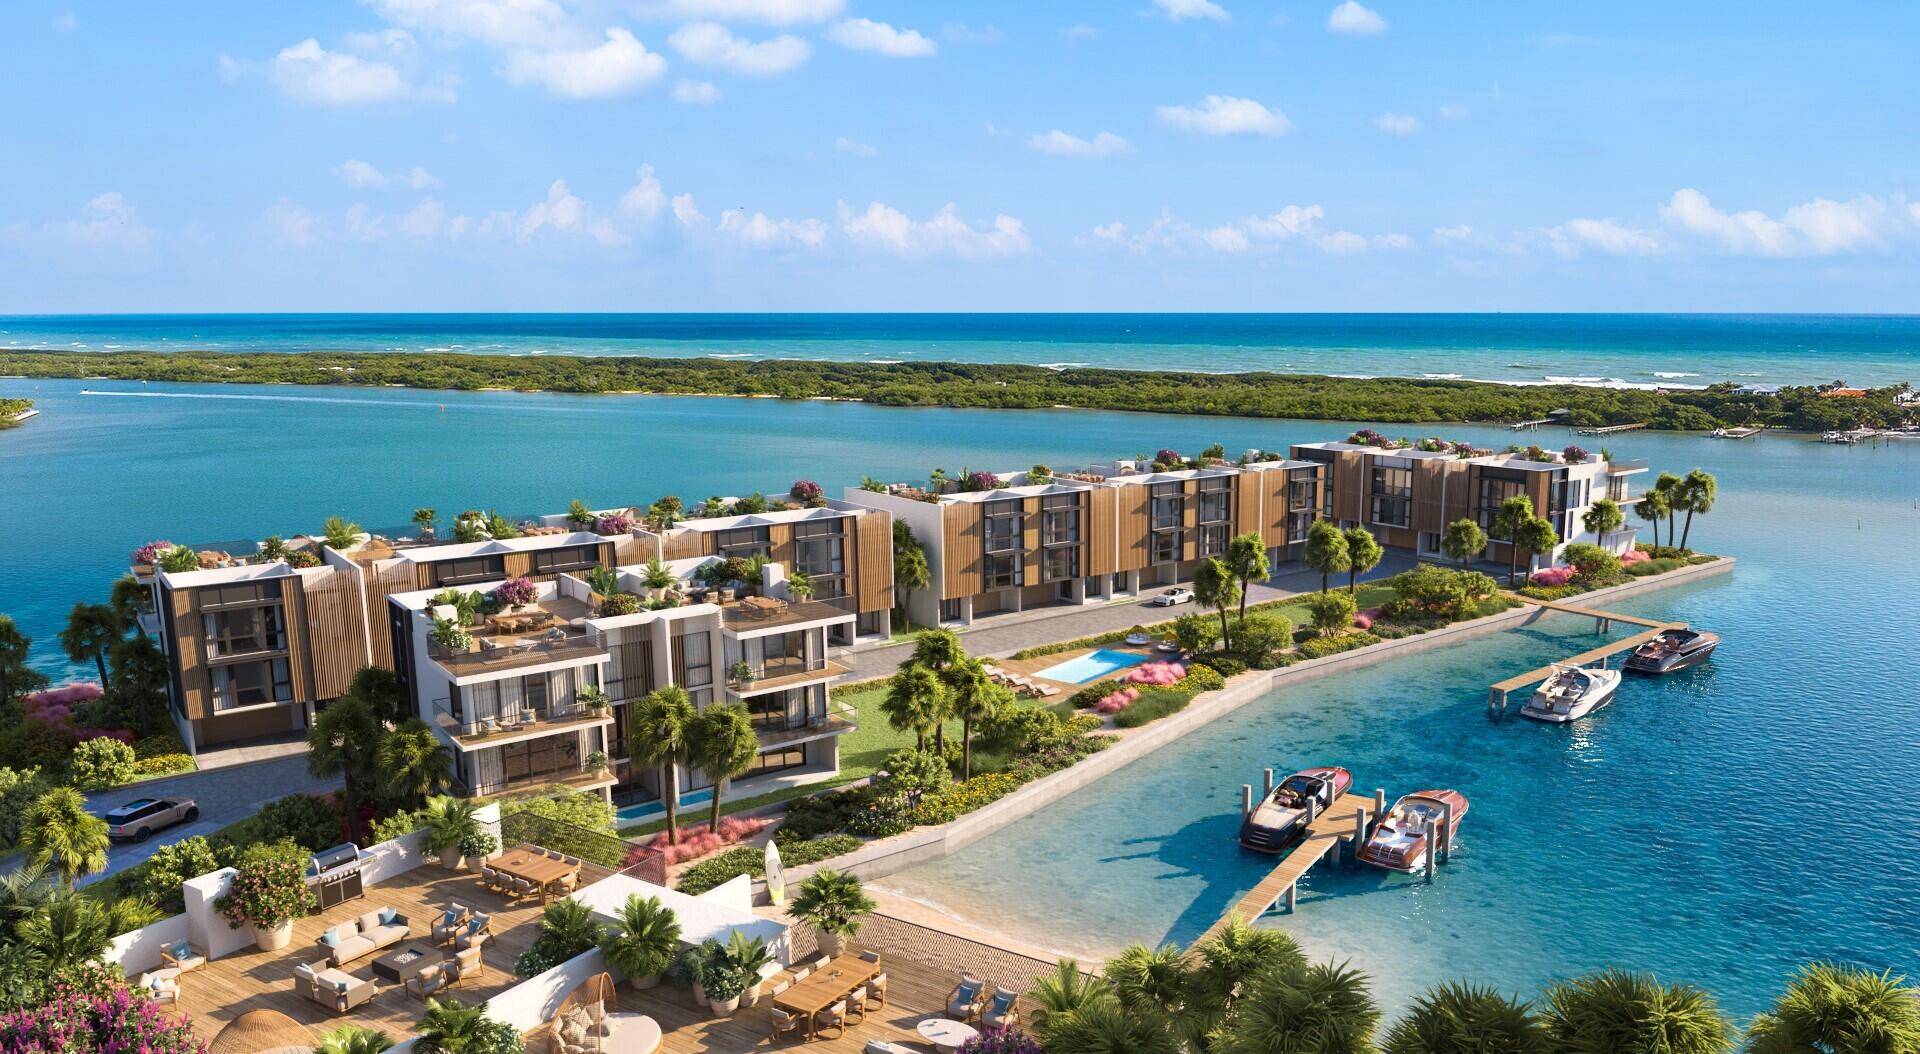 Forte Luxe, Jupiter's newest peninsula waterfront address, is a boutique collection of 15 finely appointed townhomes, boasting protected panoramic views of Bahama blue water.